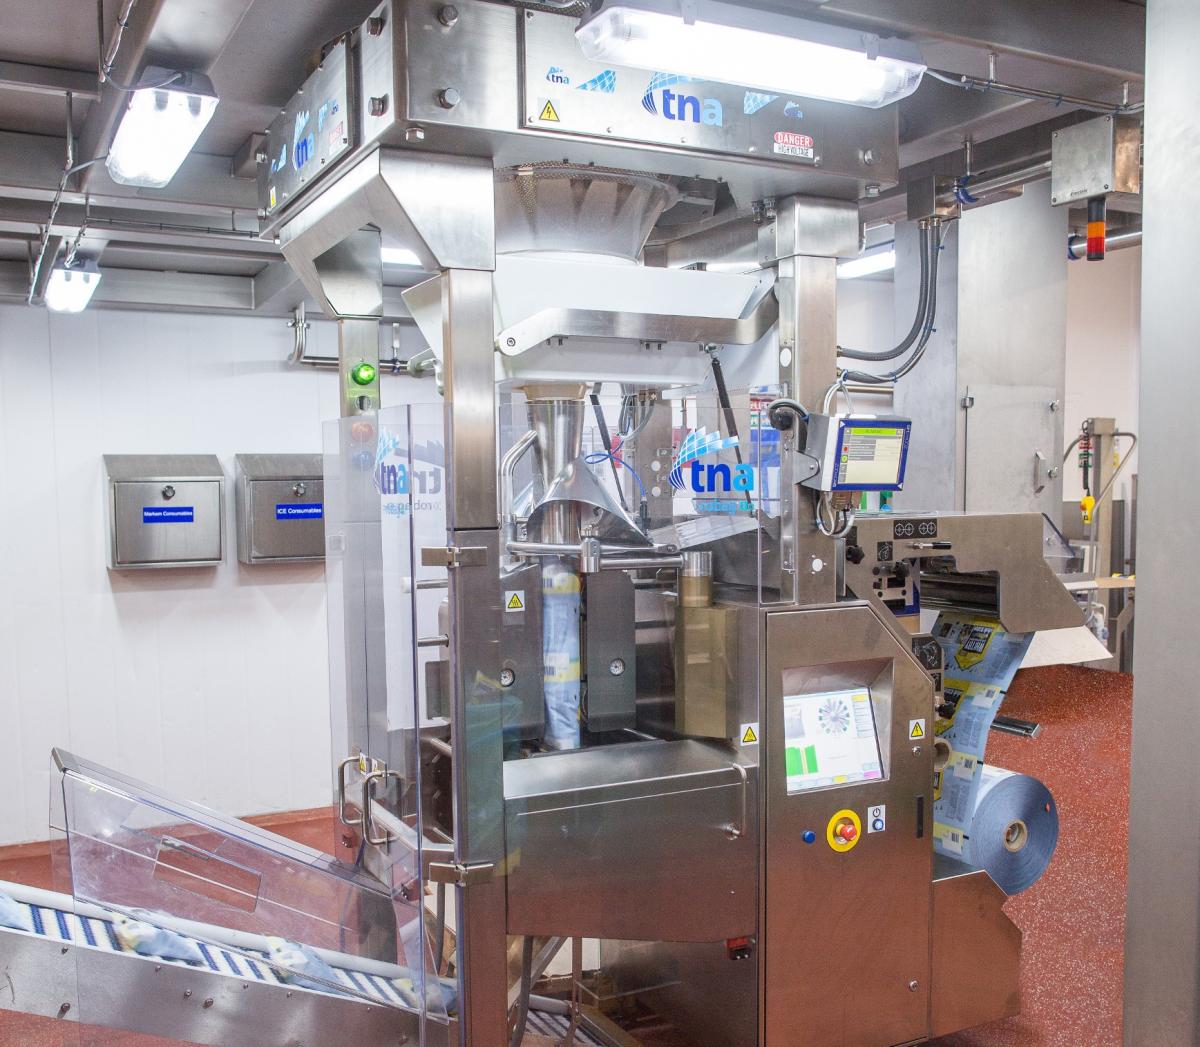 The tna robag fx3ci vertical form-fill-seal packaging system installed at Whitby Seafoods Ltd